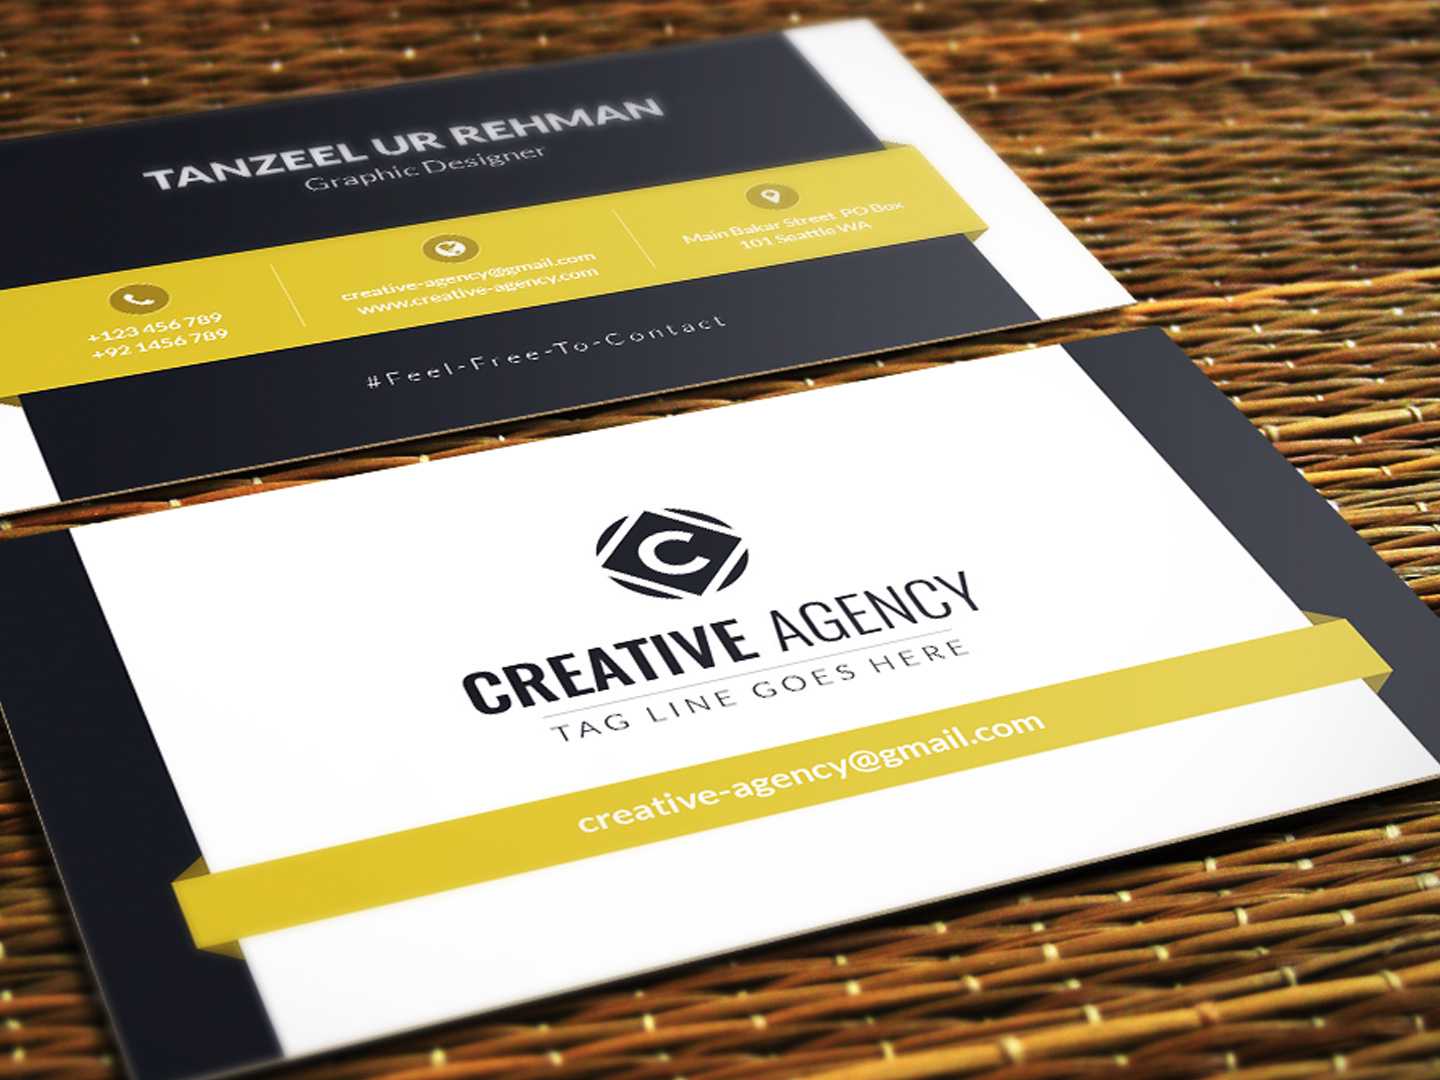 Business Cards Template – Free Downloadtanzeel Ur Rehman For Templates For Visiting Cards Free Downloads